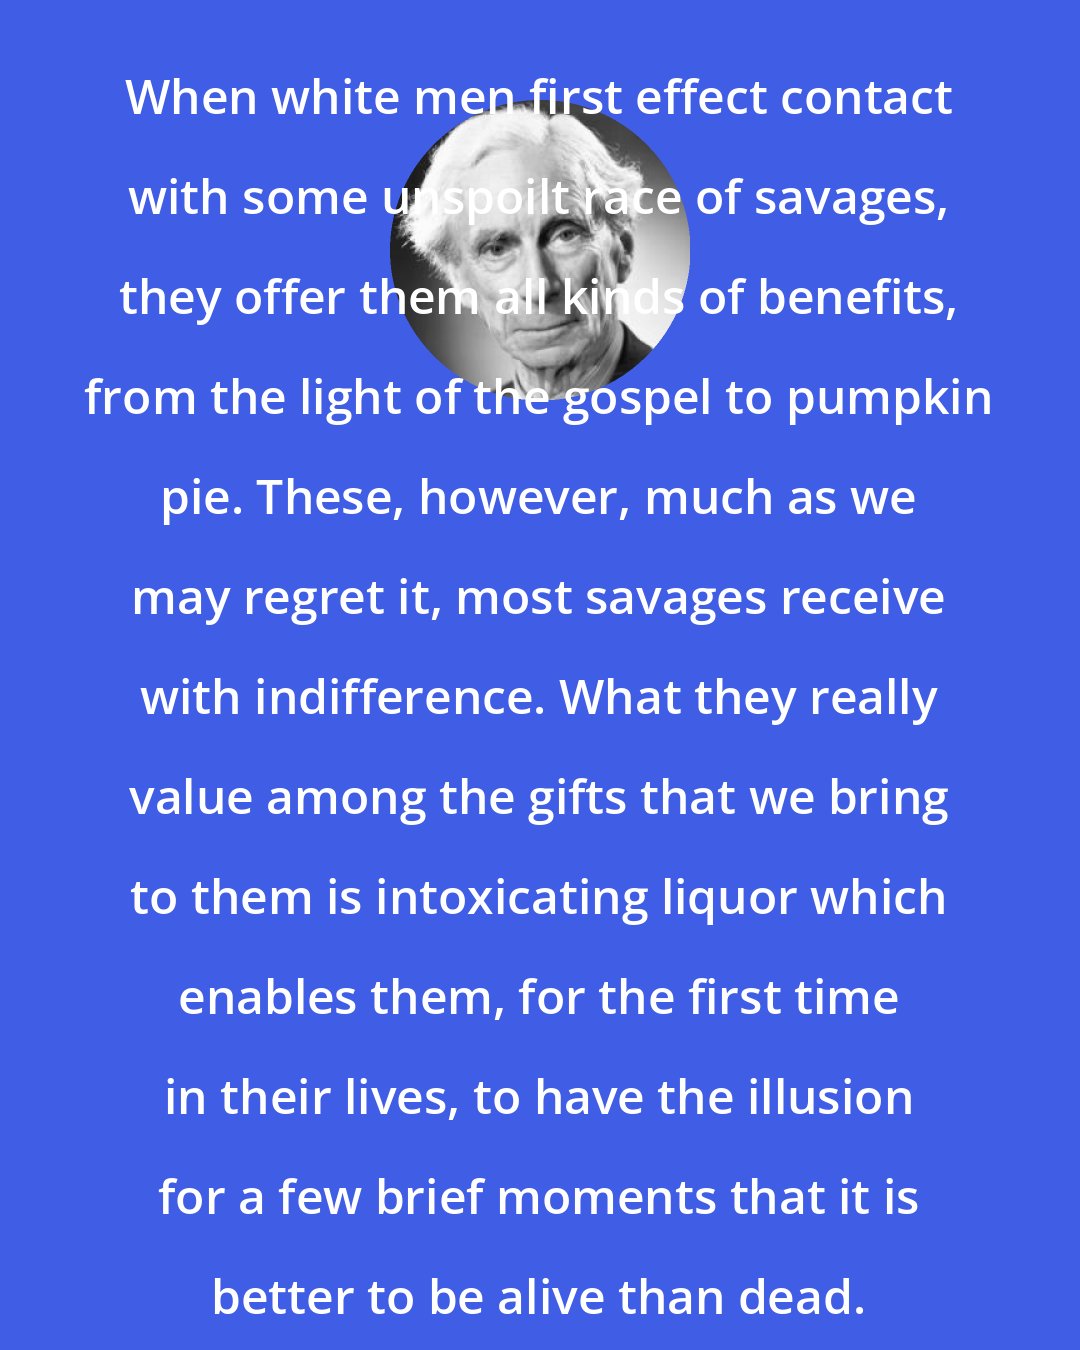 Bertrand Russell: When white men first effect contact with some unspoilt race of savages, they offer them all kinds of benefits, from the light of the gospel to pumpkin pie. These, however, much as we may regret it, most savages receive with indifference. What they really value among the gifts that we bring to them is intoxicating liquor which enables them, for the first time in their lives, to have the illusion for a few brief moments that it is better to be alive than dead.